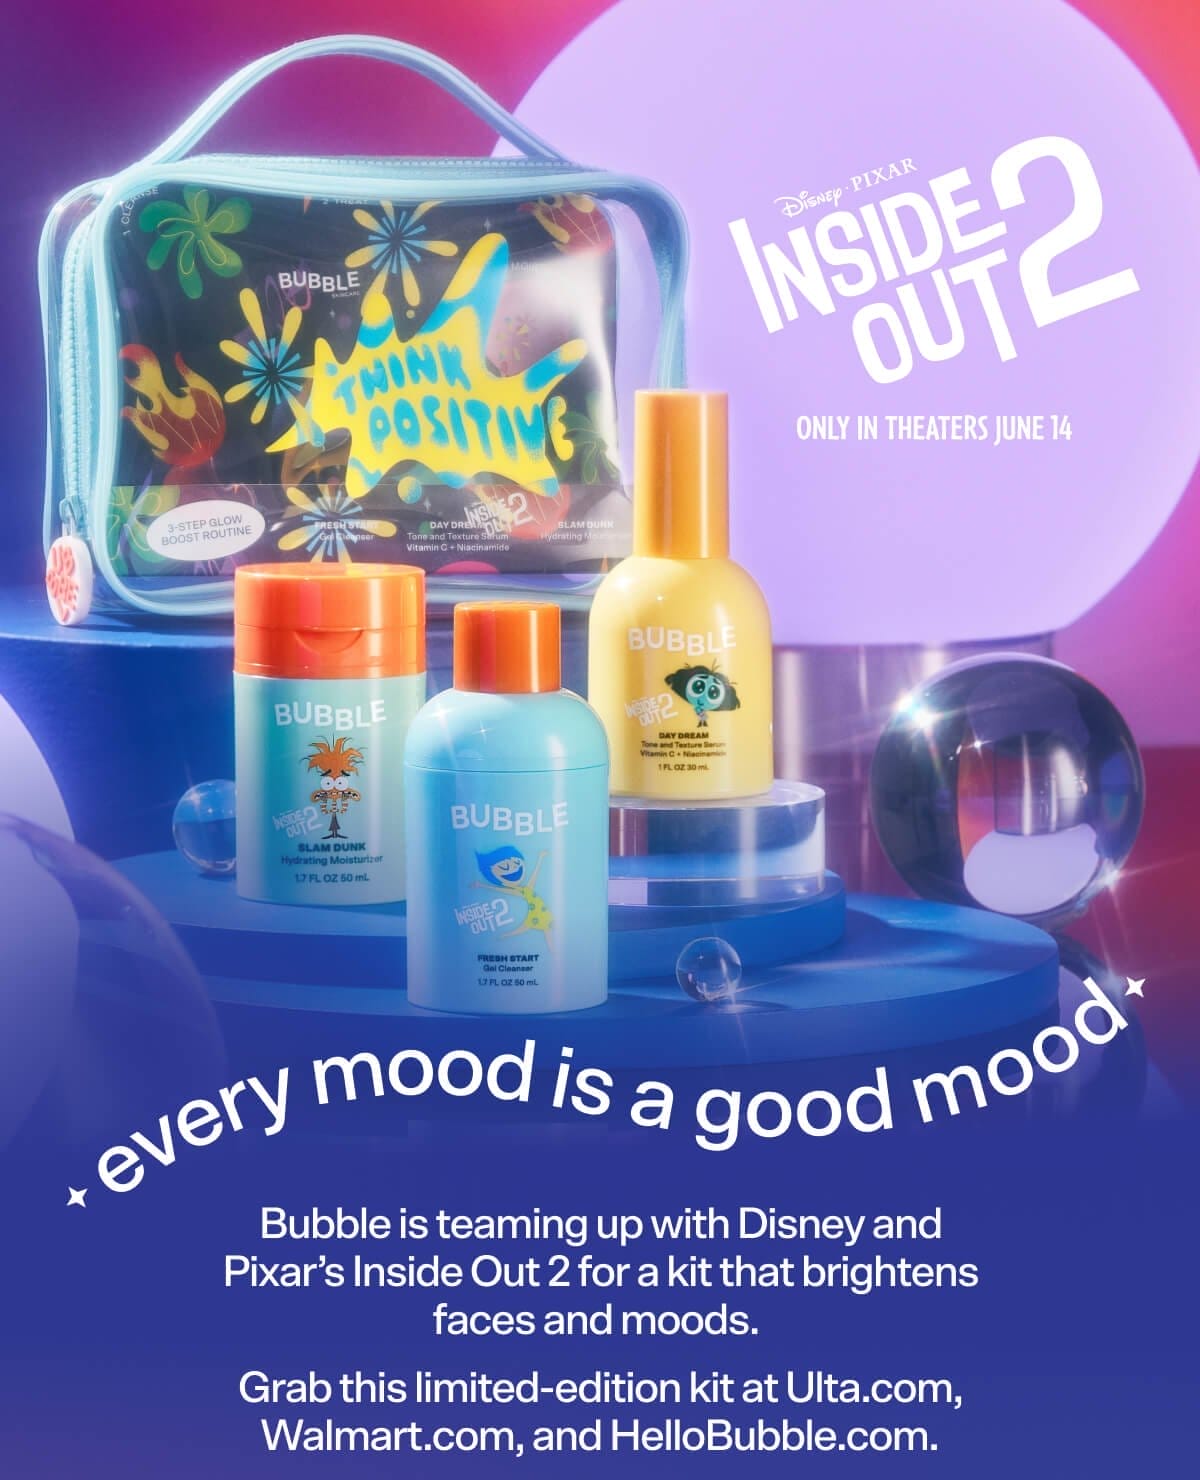 Disney and Pixar's Inside Out 2 Only Only In Theaters June 14 | Every Mood Is a Good Mood Bubble is teaming up with Disney and Pixar’s Inside Out 2 for a kit that brightens faces and moods.